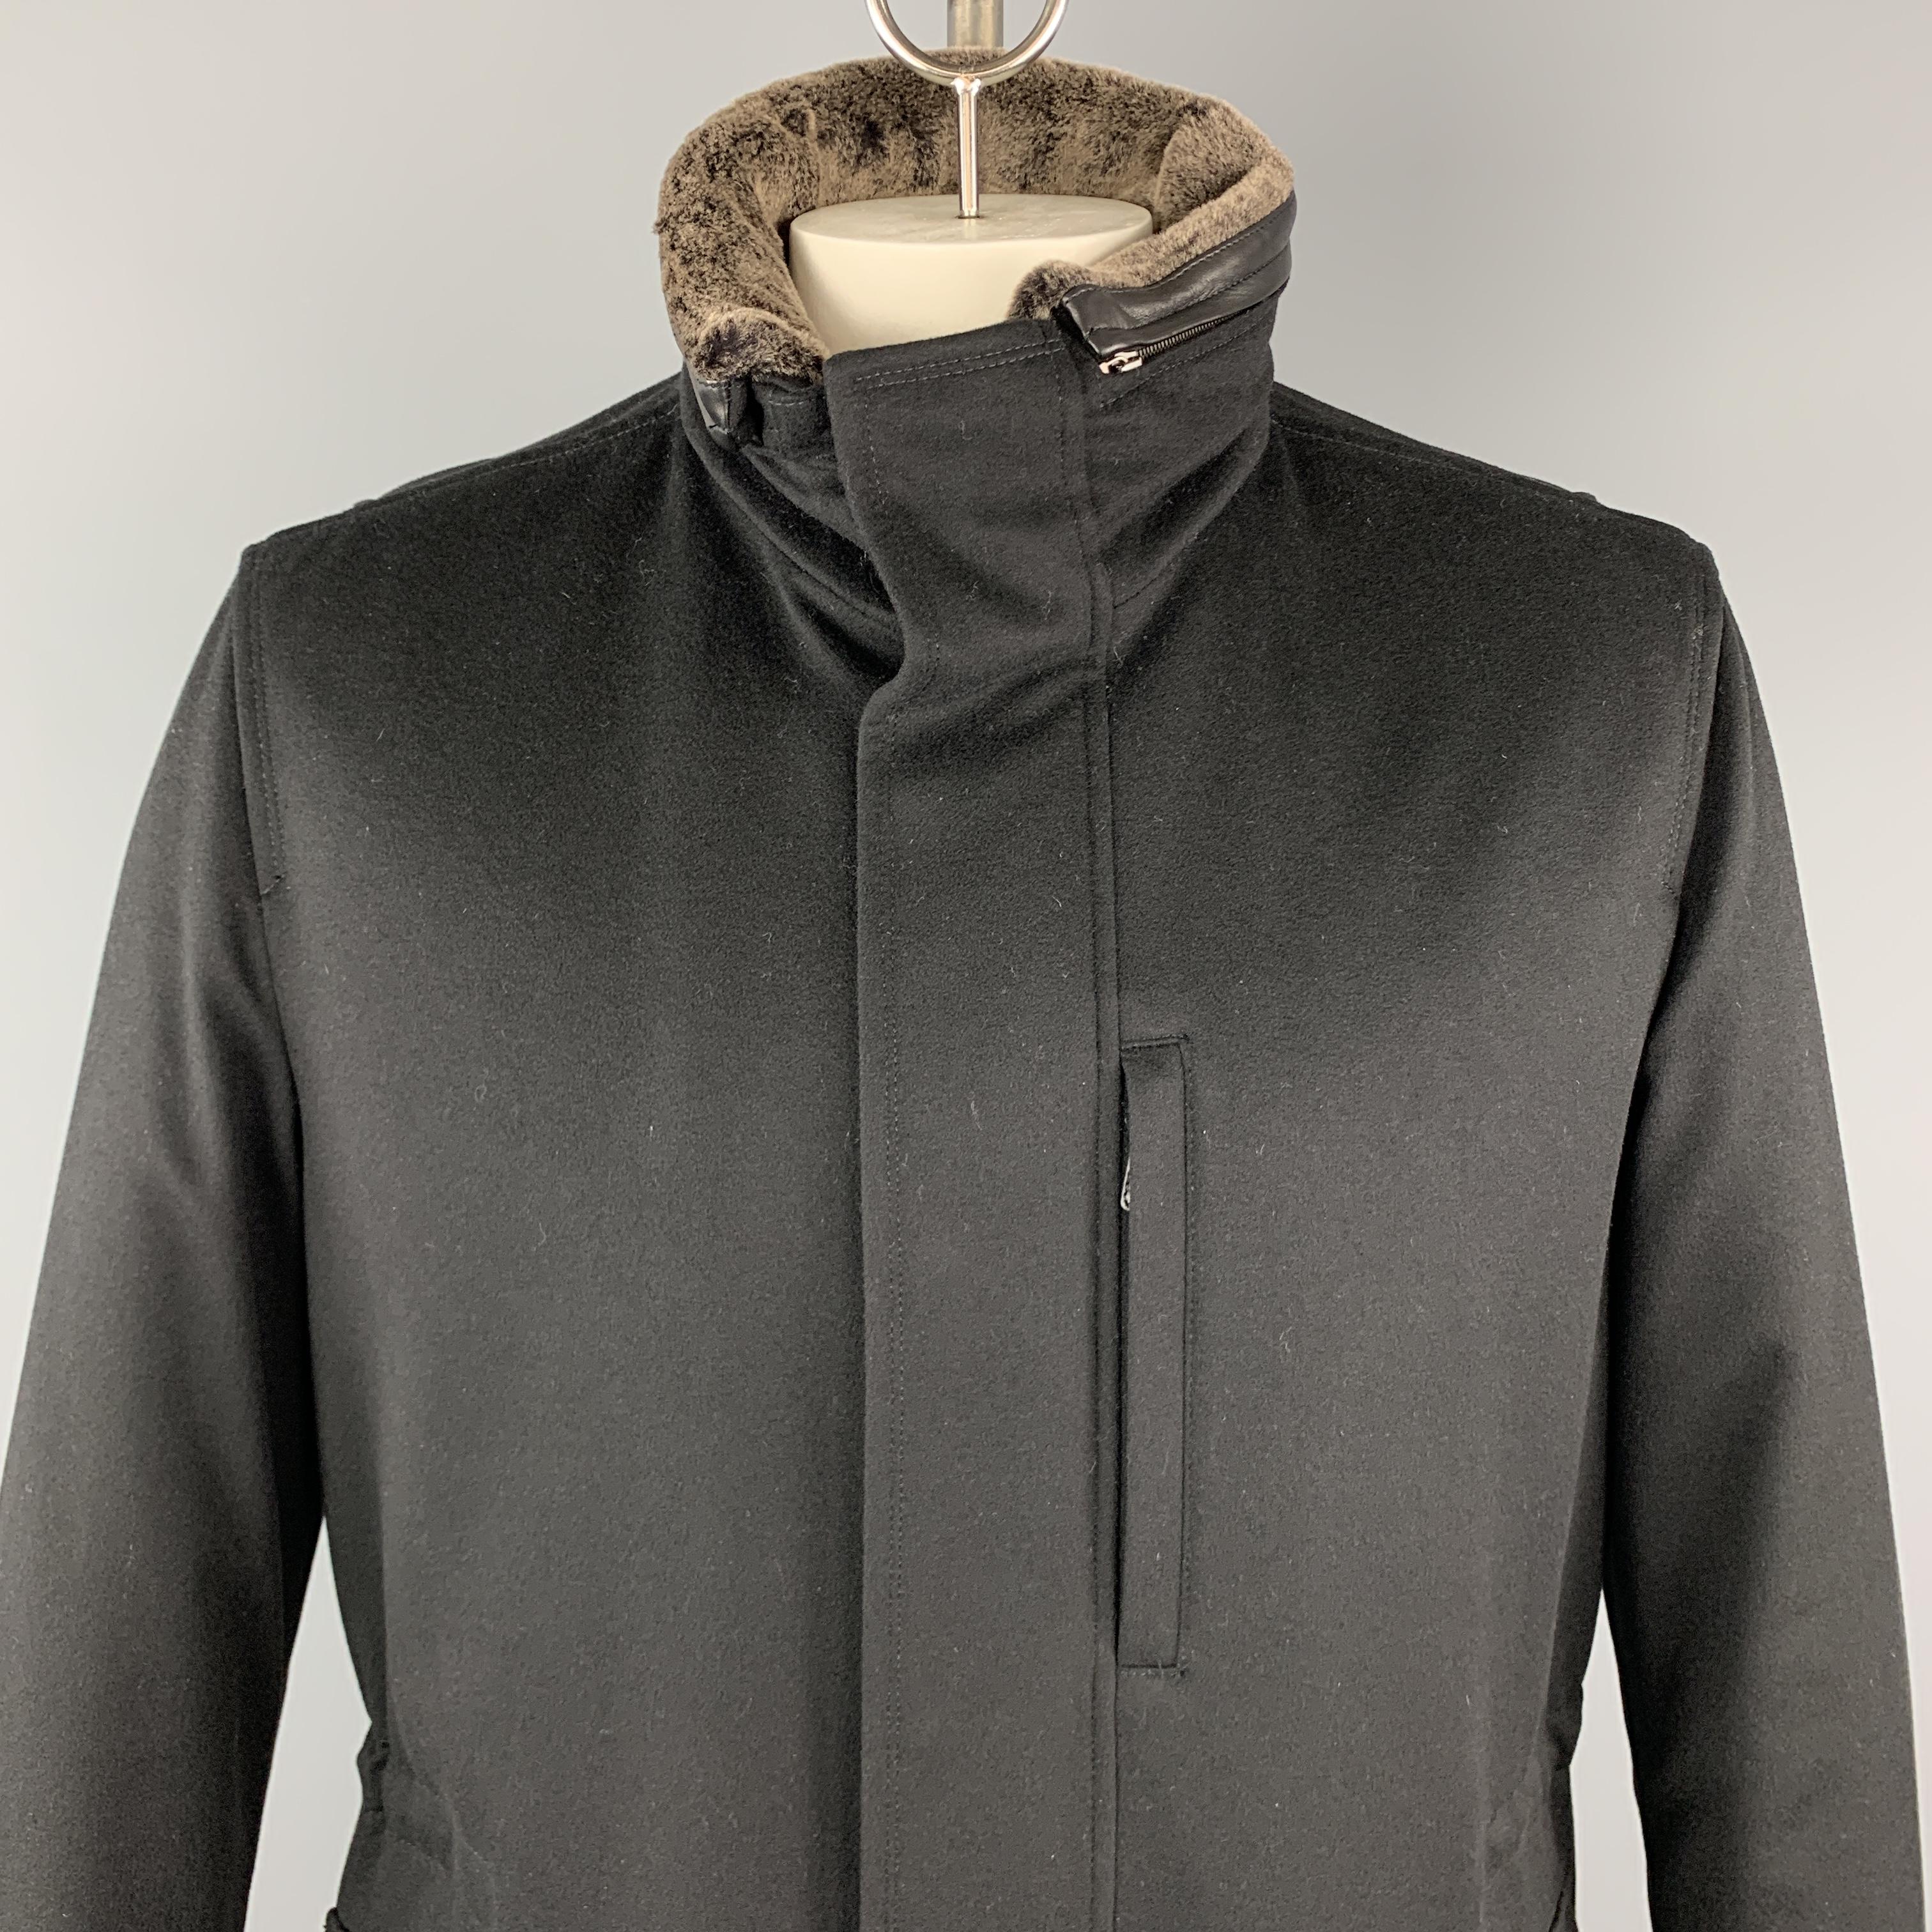 ERMENEGILDO ZEGNA coat comes in black cashmere with a zip front, hidden snap placket, drawstring waist, flap and zip pockets, and optional faux fur collar or hood. Made in Portugal.

New with Tags. 
Marked: IT 50

Measurements:

Shoulder: 19